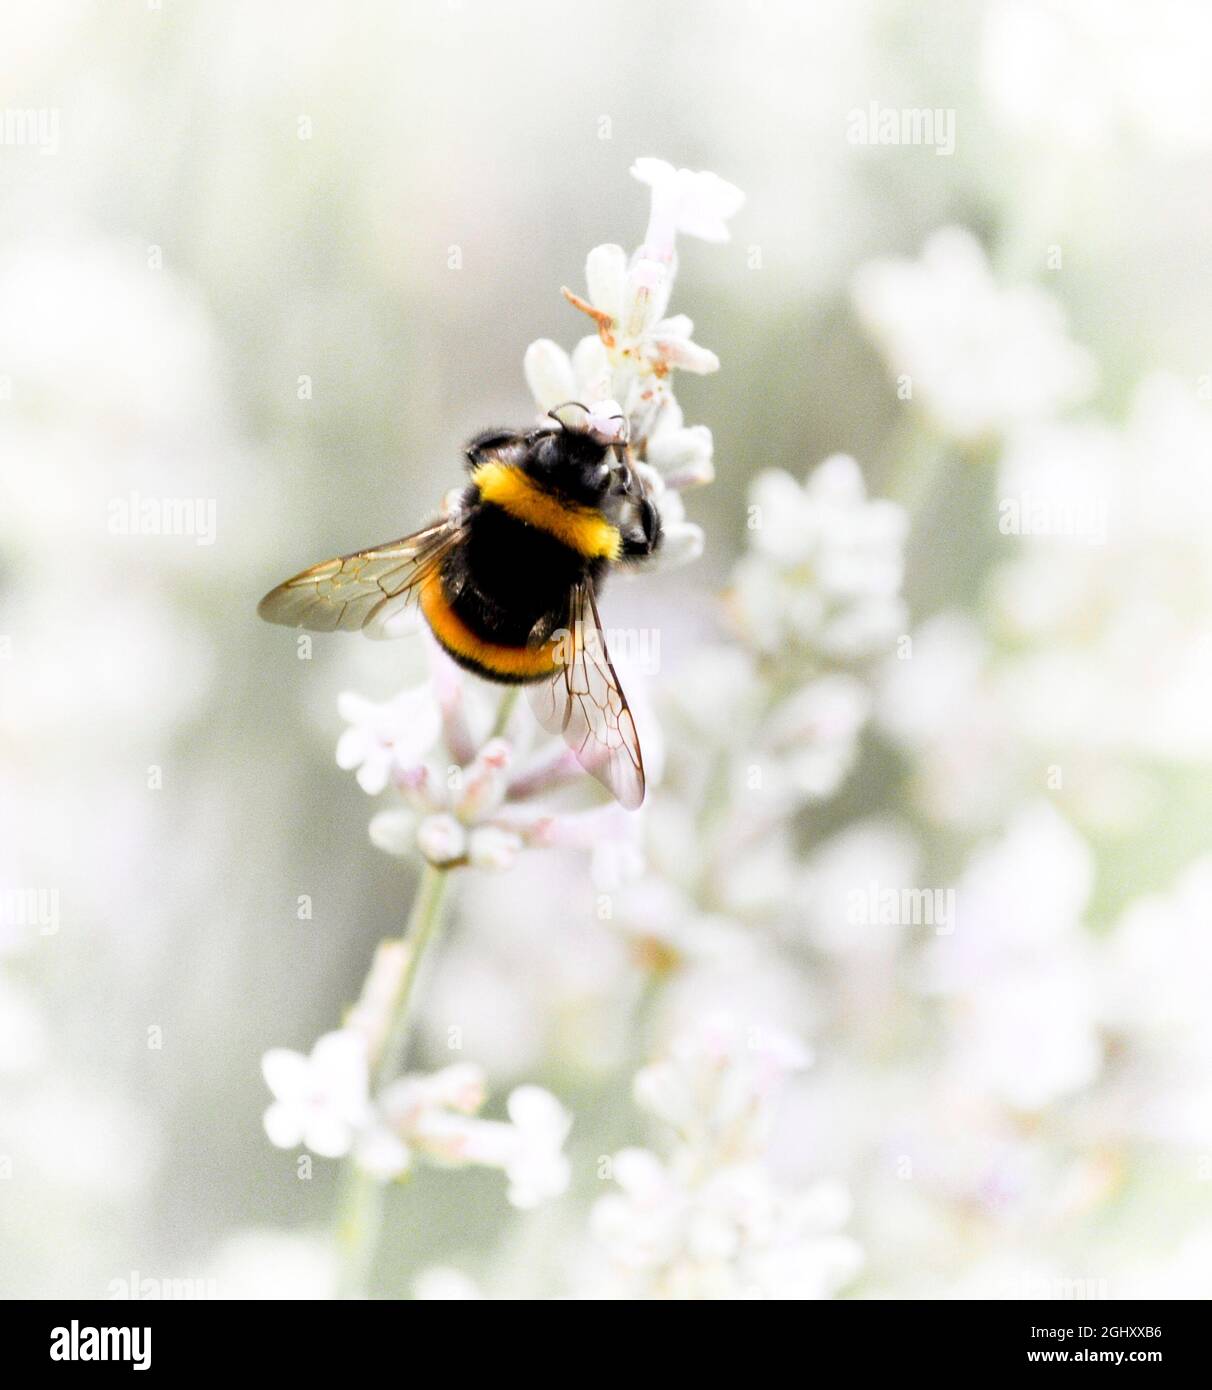 A bumble bee (bombus) on a white lavender (Lavandula angustifolia Arctic Snow) in a garden Stock Photo